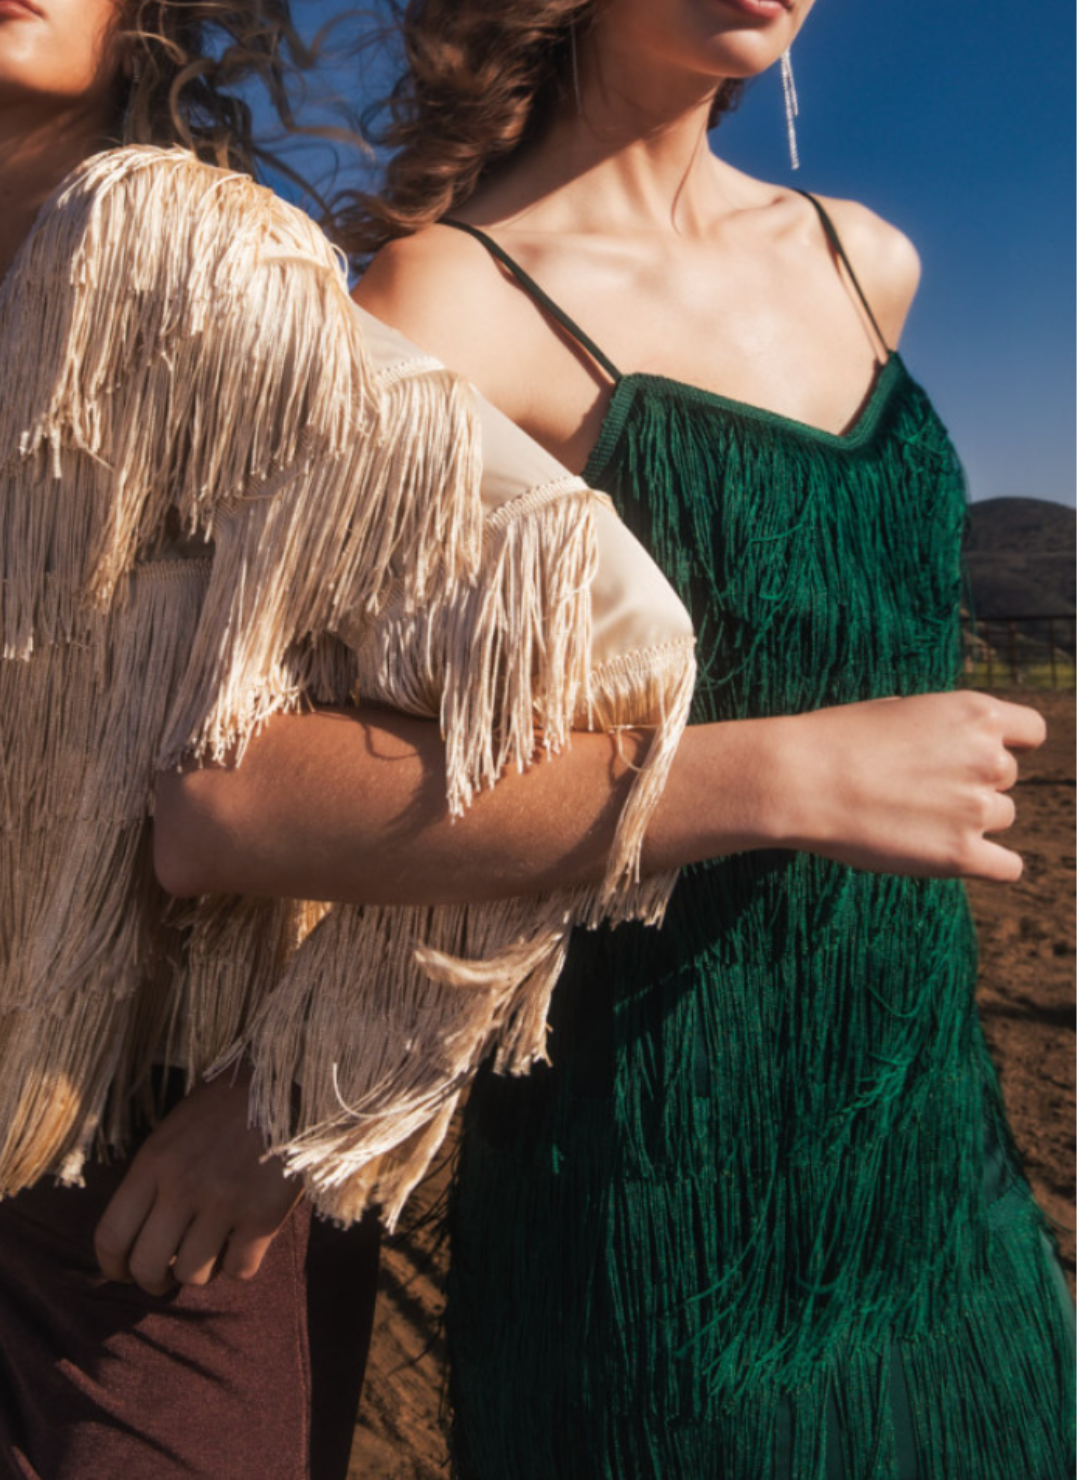 Model wearing green Gi Fringe Strap Dress is linked arms with another model wearing a cream colored fringe outfit. 